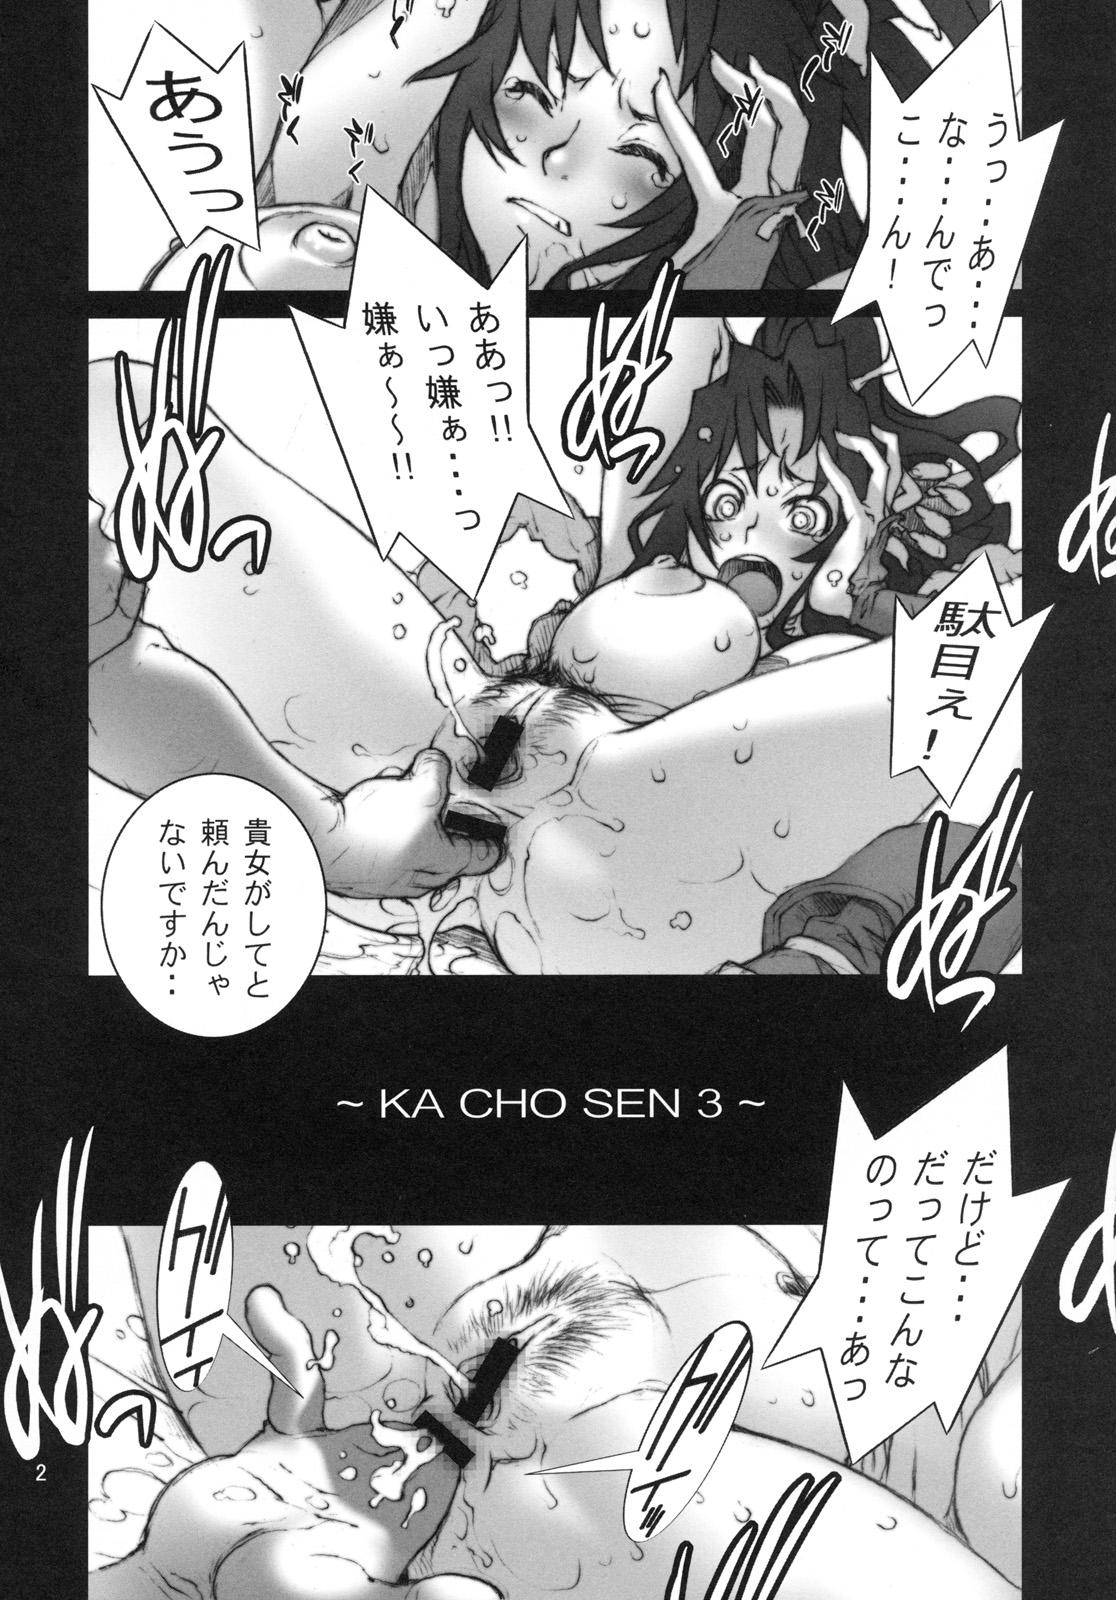 Gaypawn Kachousen San - King of fighters Play - Page 3